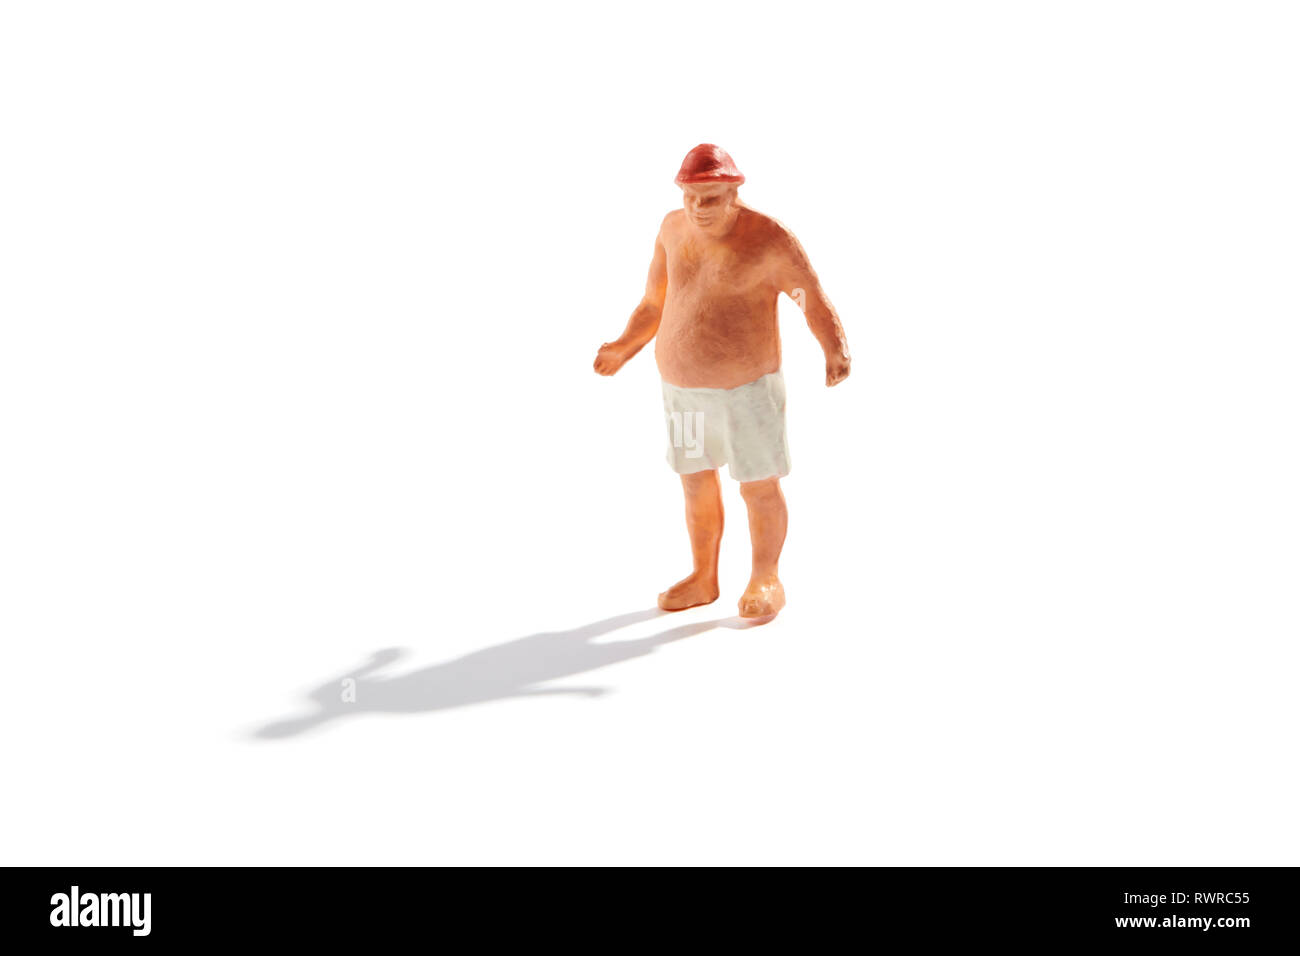 Obese miniature man with large fat paunch in bathing trunks standing on a beach isolated on white with shadow Stock Photo